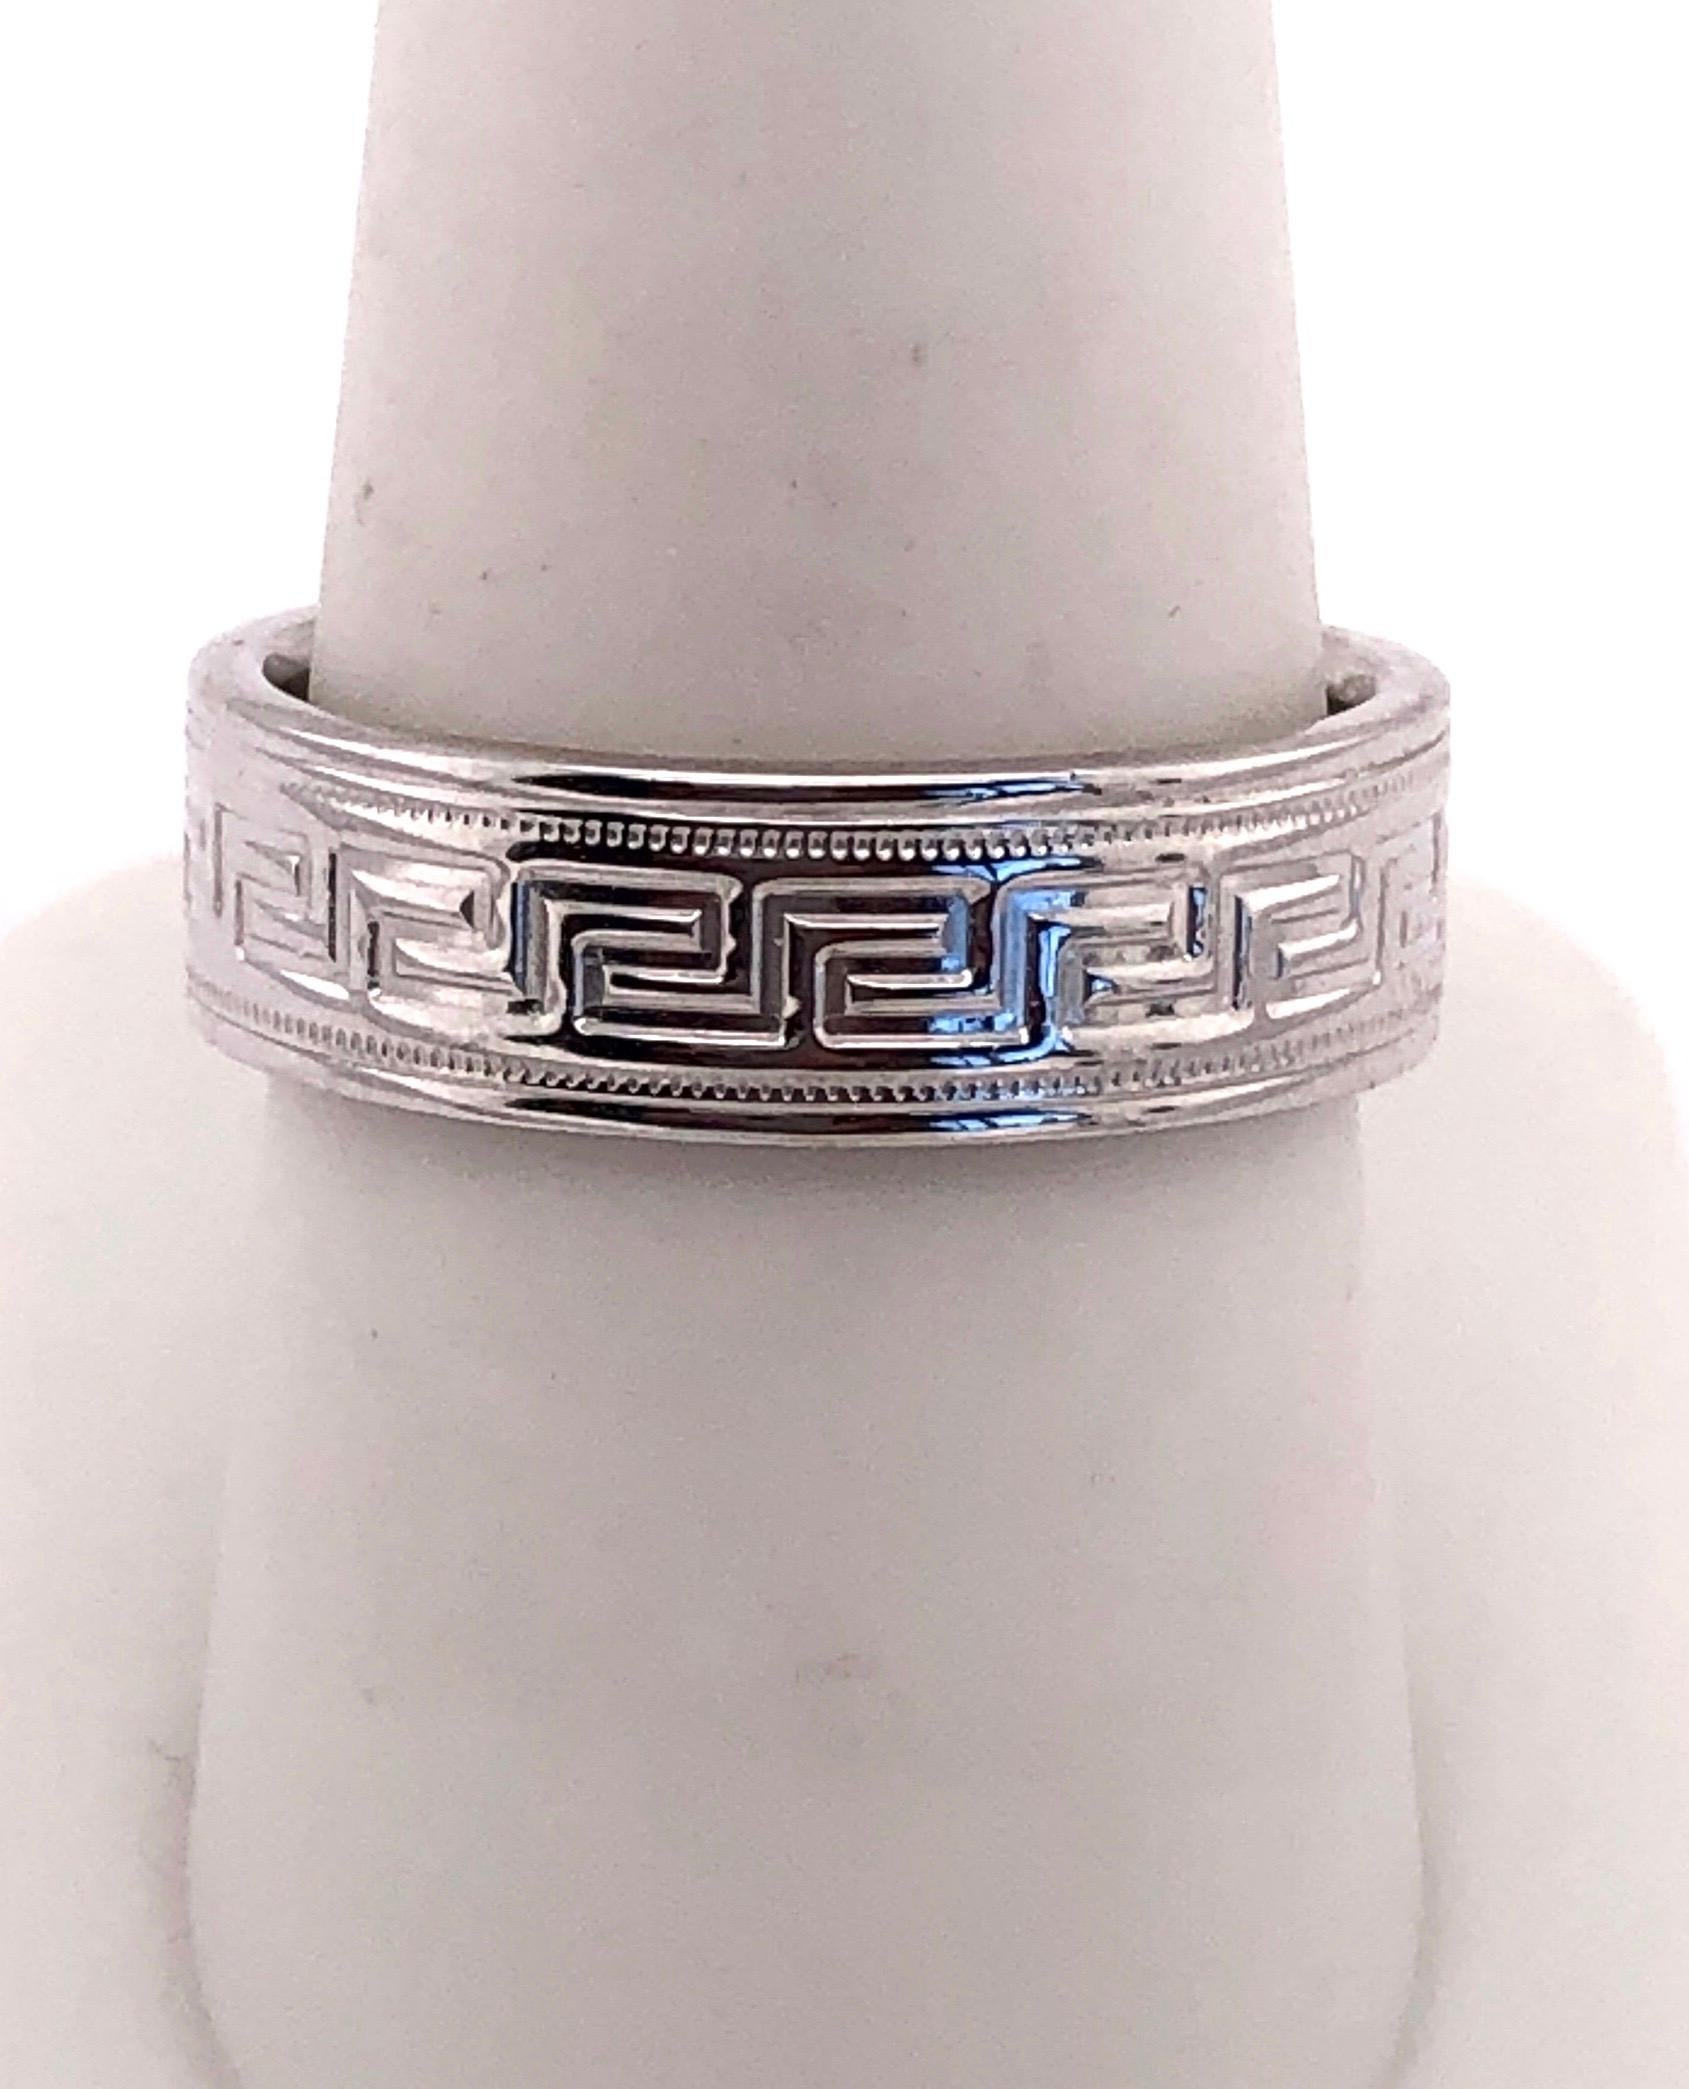 14 Karat White Gold Band Ring Wedding Band Ring Greek Key Design In Good Condition For Sale In Stamford, CT